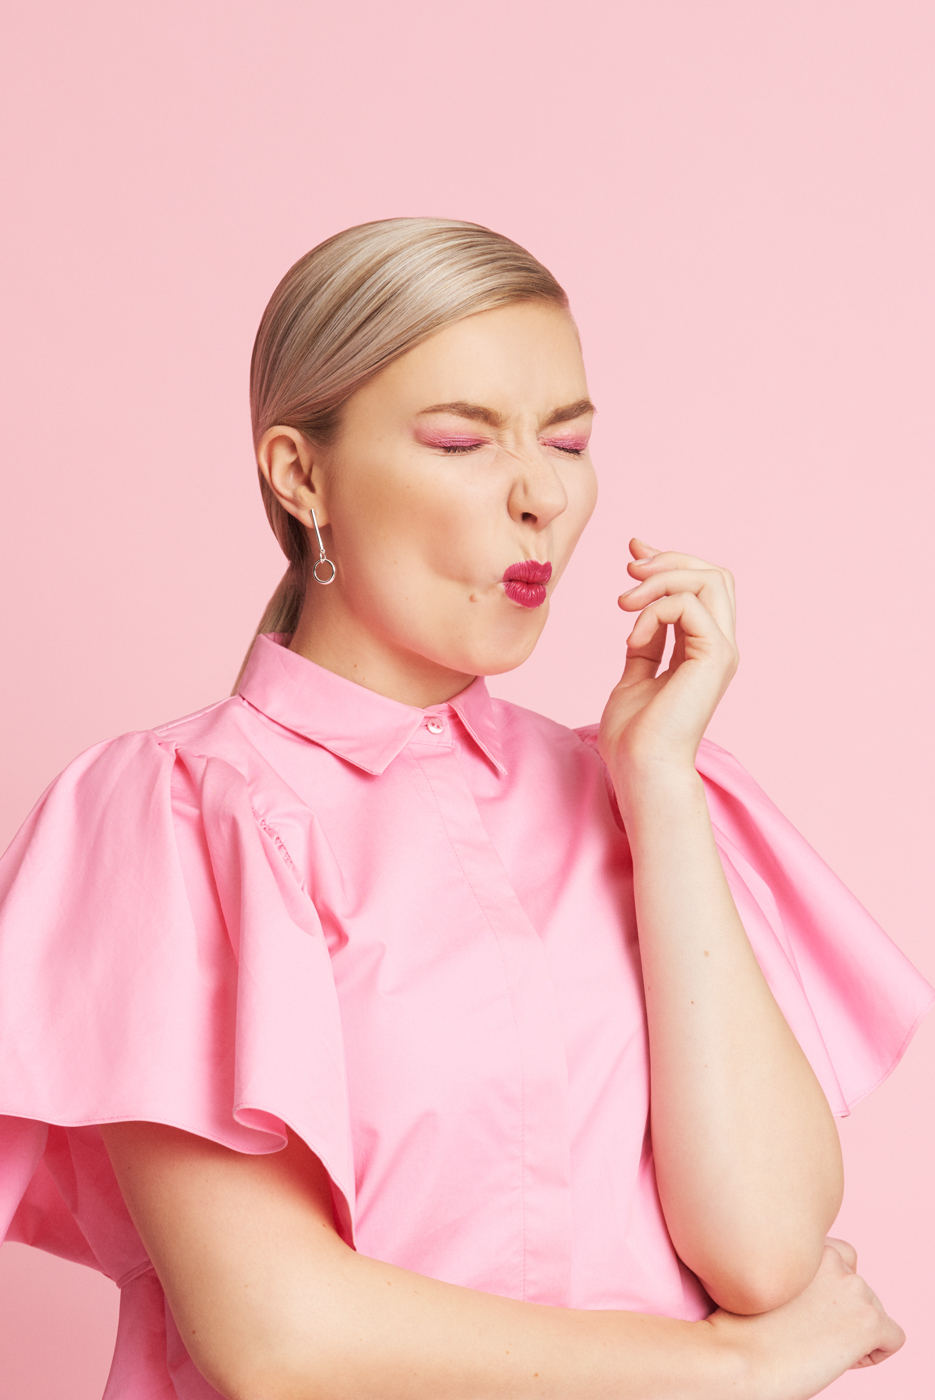 Portrait_of_Blond_Young_Woman_Making_Funny_Face_on_Pink_Backdrop_for_Muud_Creative_by_Sara_Lehtomaa